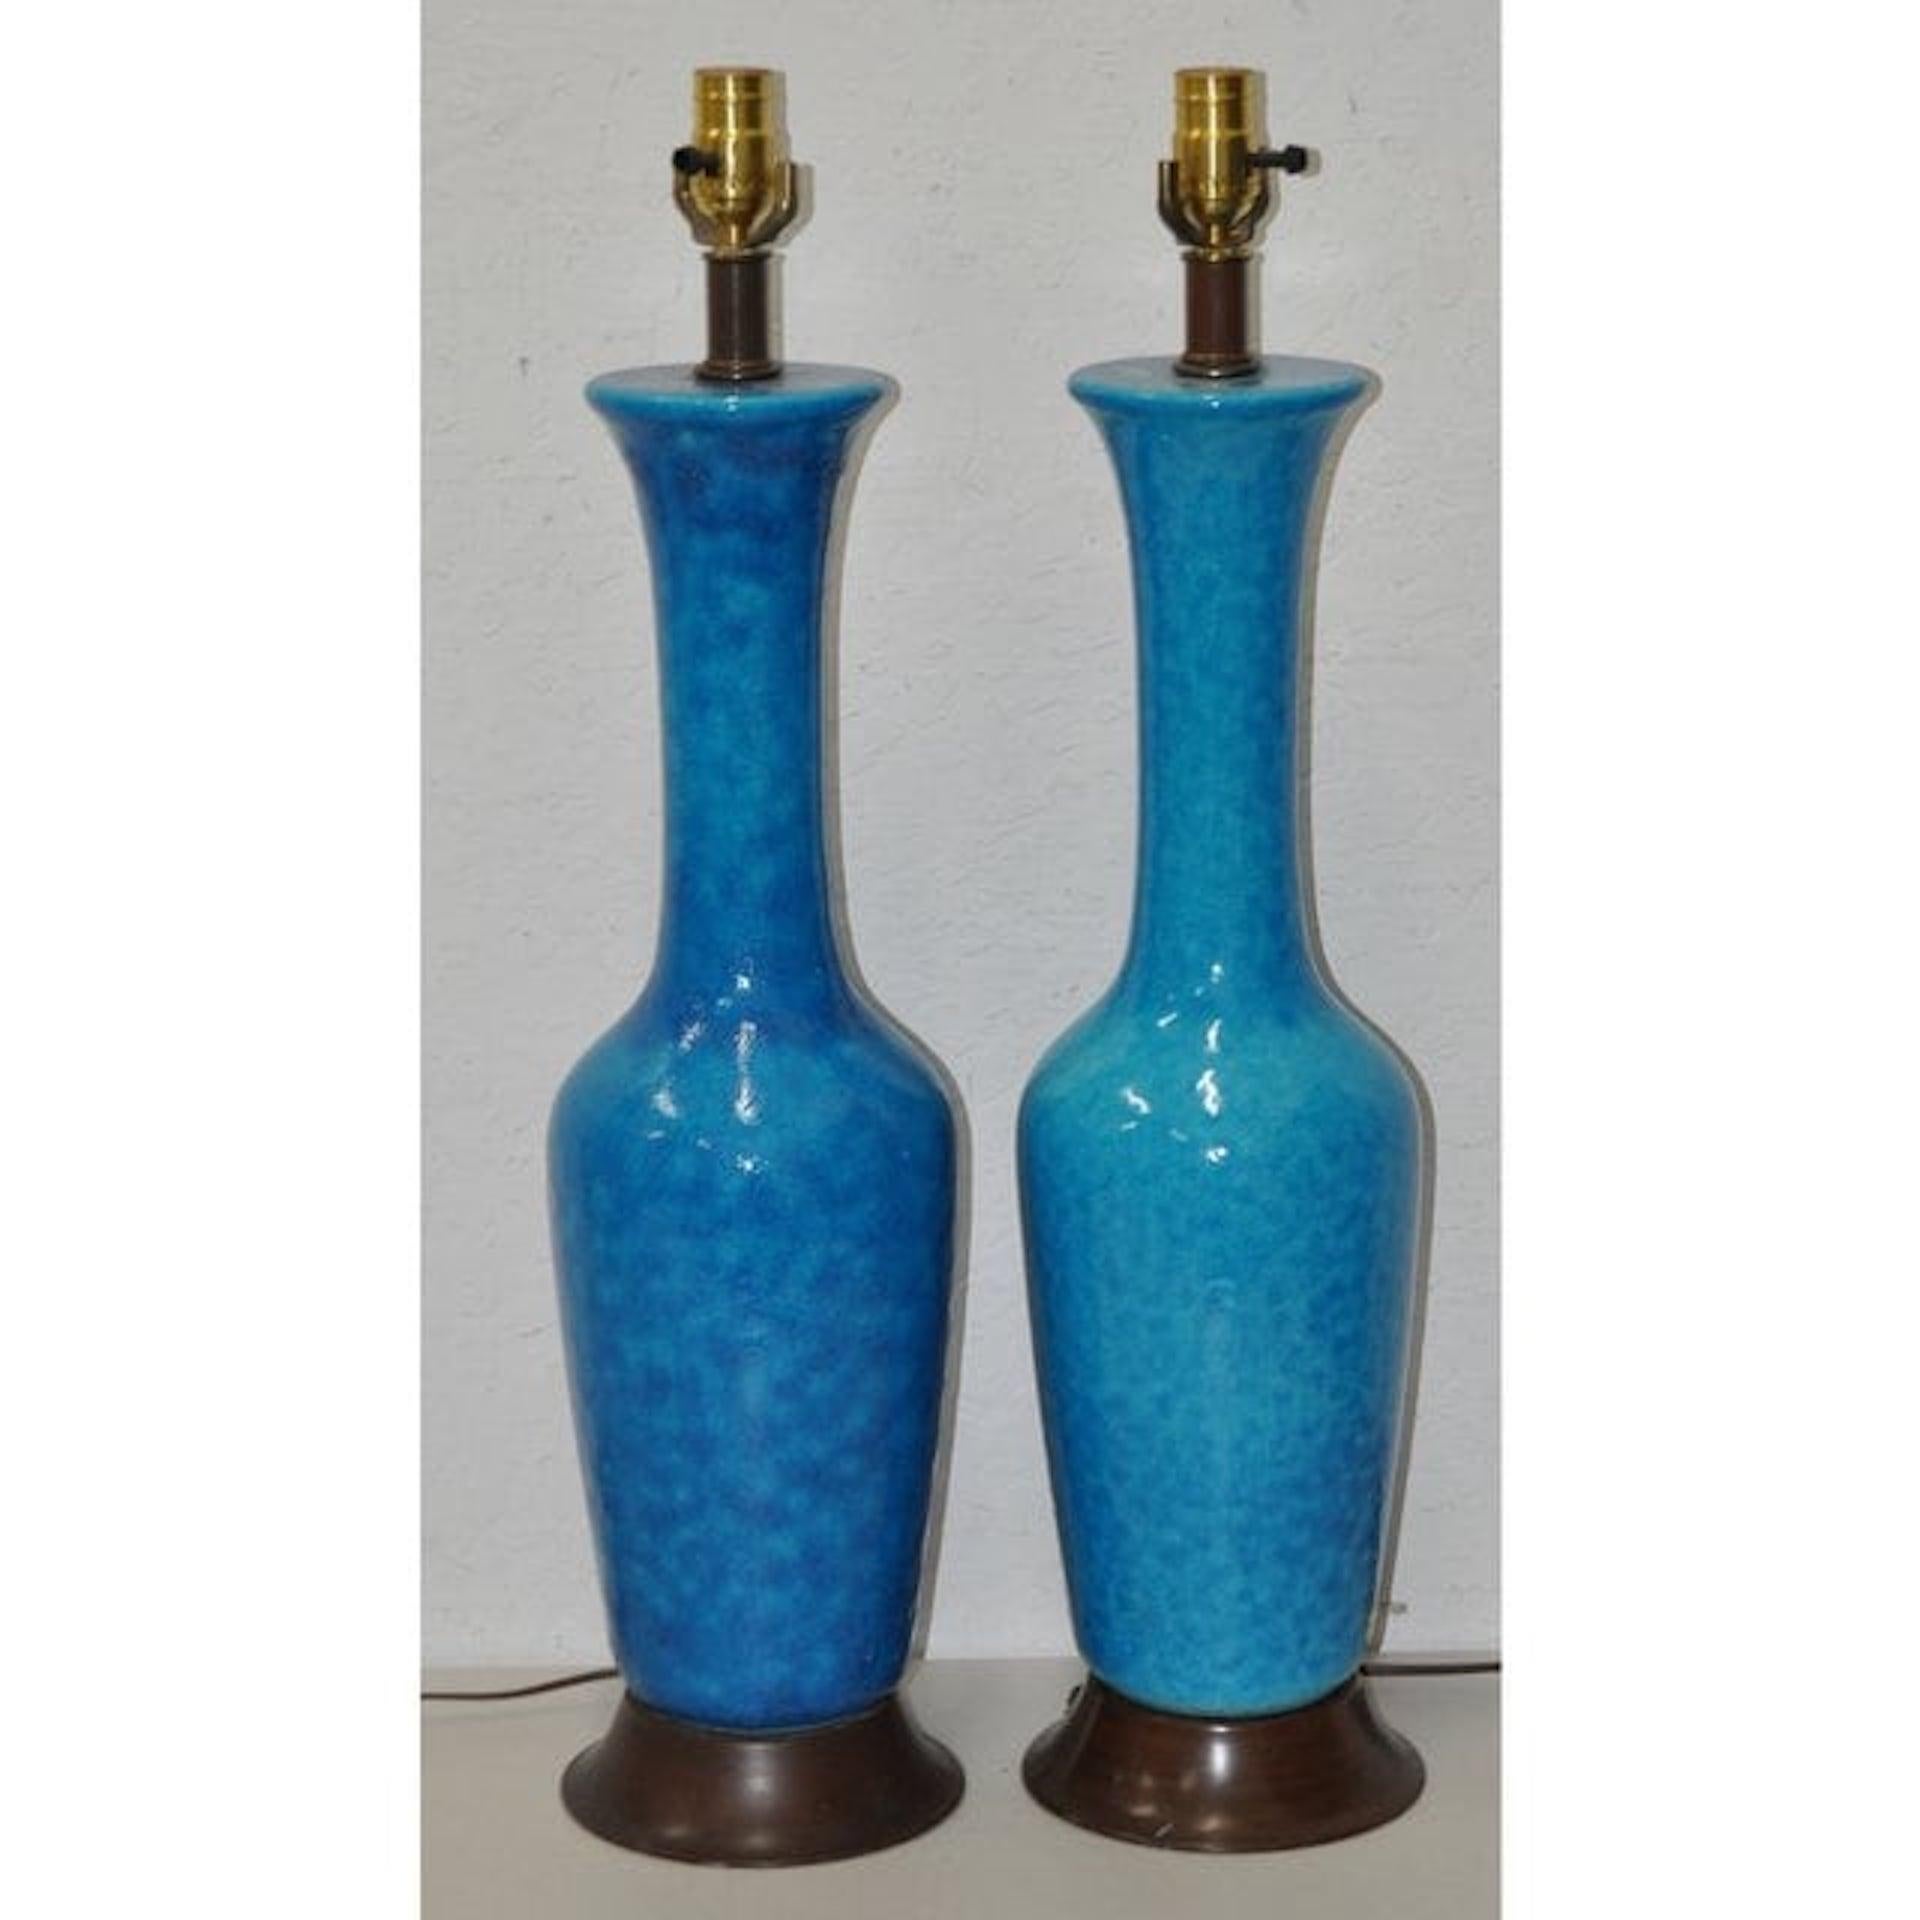 Pair of Phil Mar Glazed Pottery table lamps circa 1950s

Impressive pair of blue crackle glazed table lamps by Phil Mar Corp. Cleveland, OH.

Measures: 6 3/4